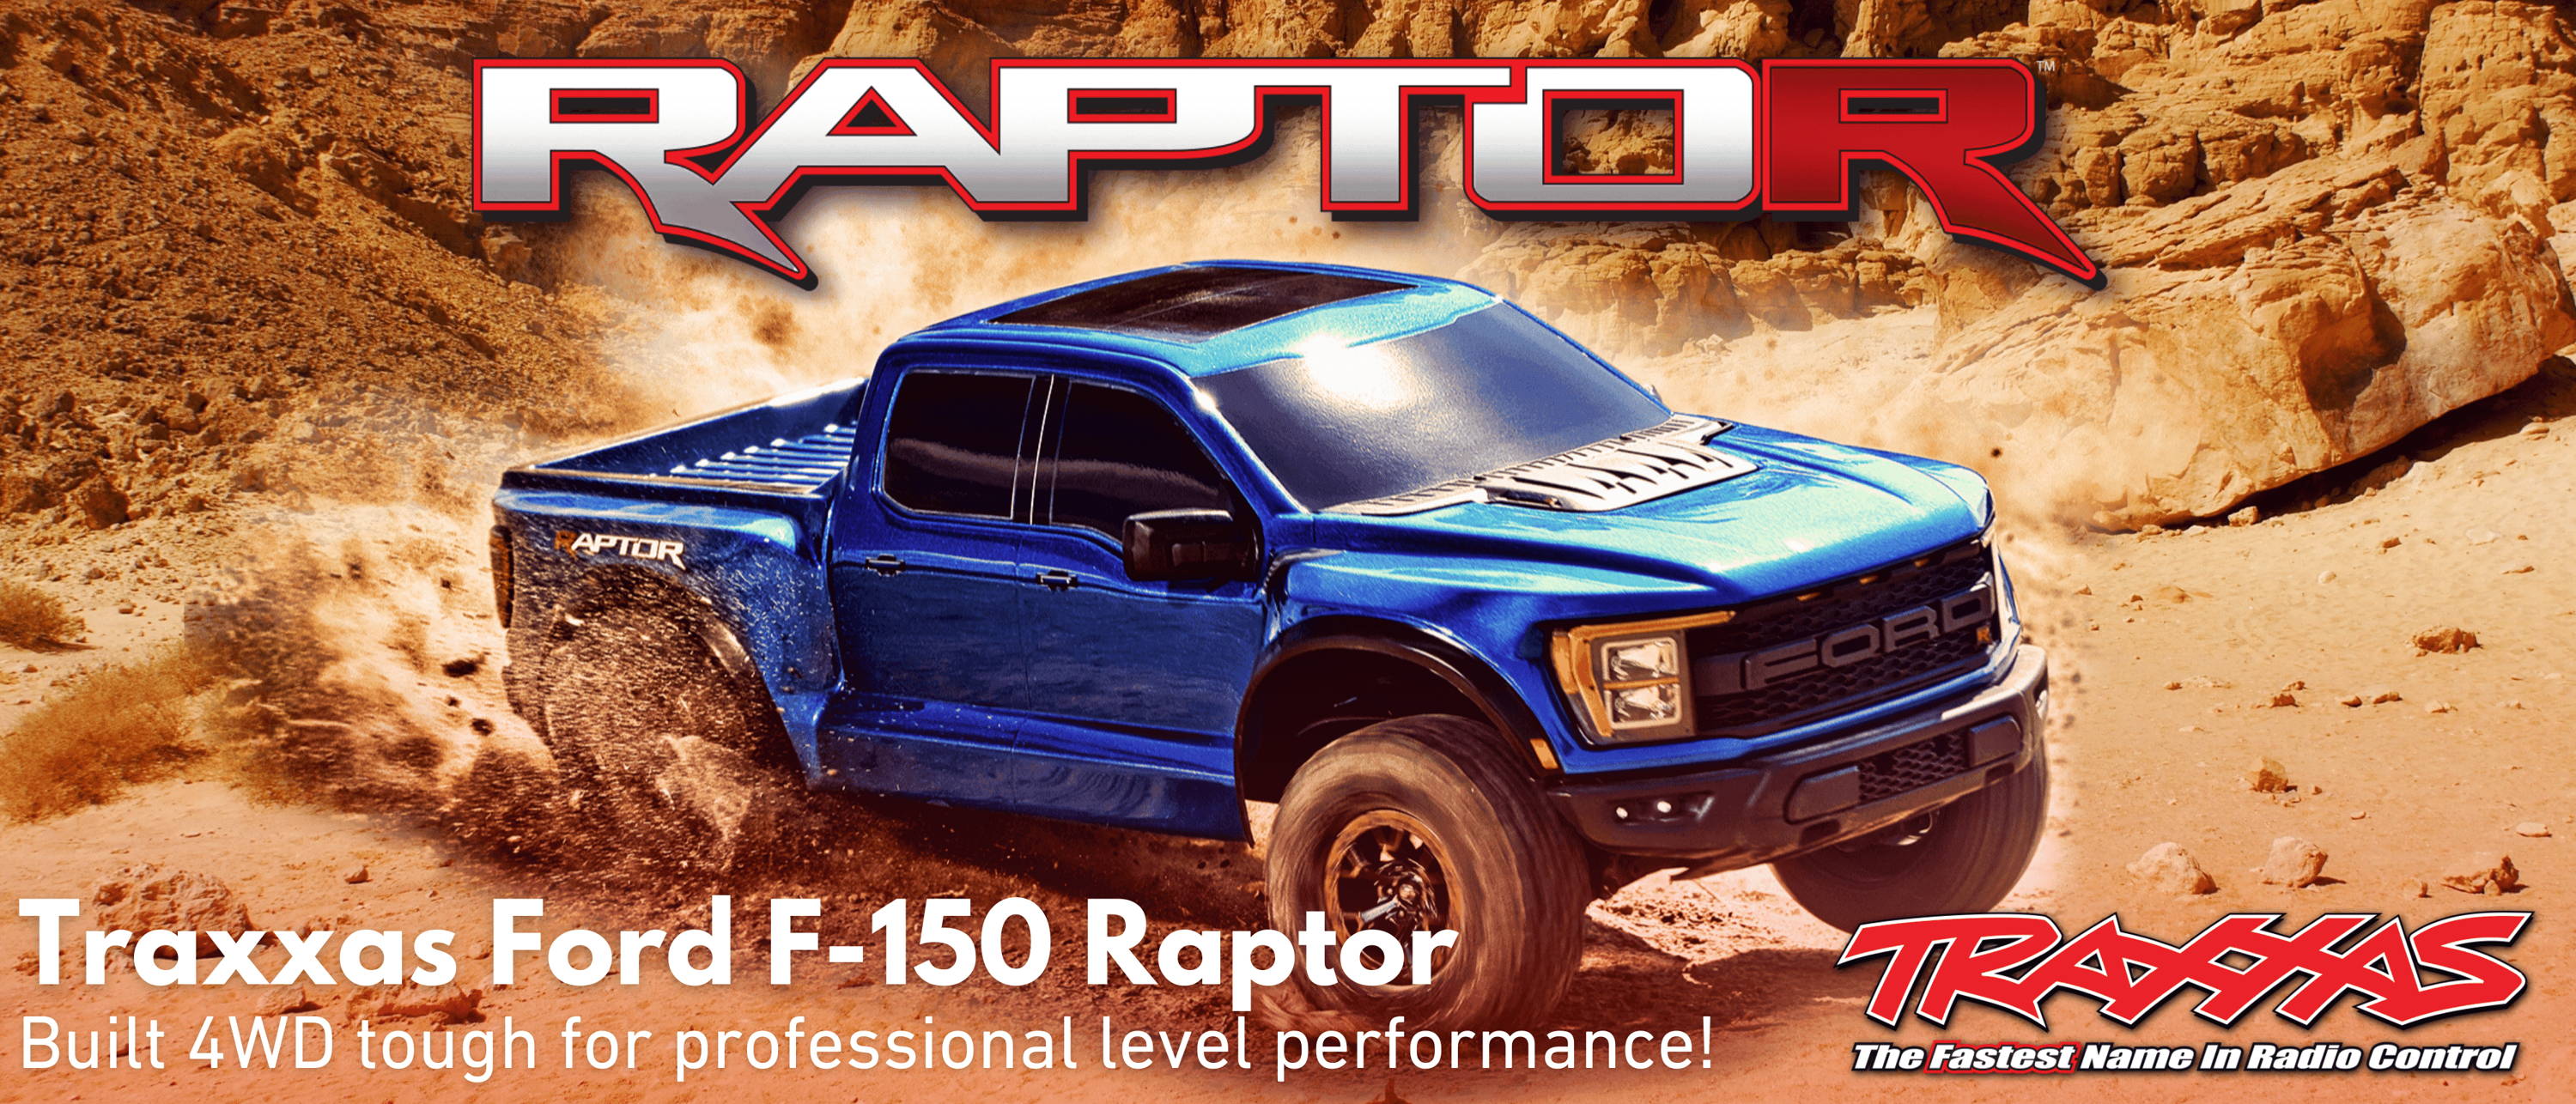 The Traxxas Ford F-150 Raptor